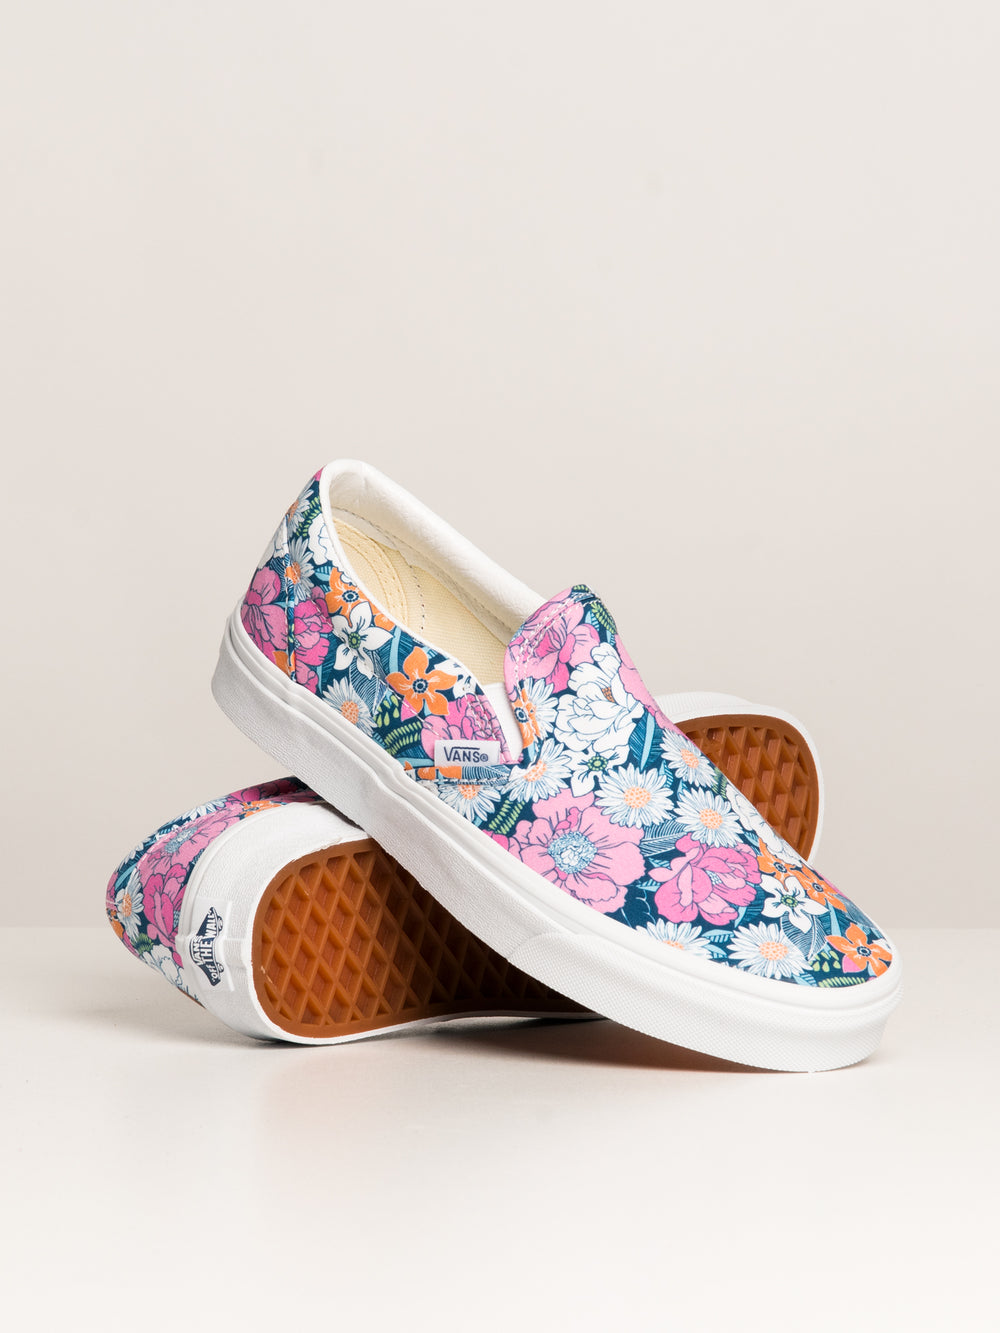 WOMENS VANS CLASSIC SLIP ON RETRO FLORAL SNEAKER - CLEARANCE